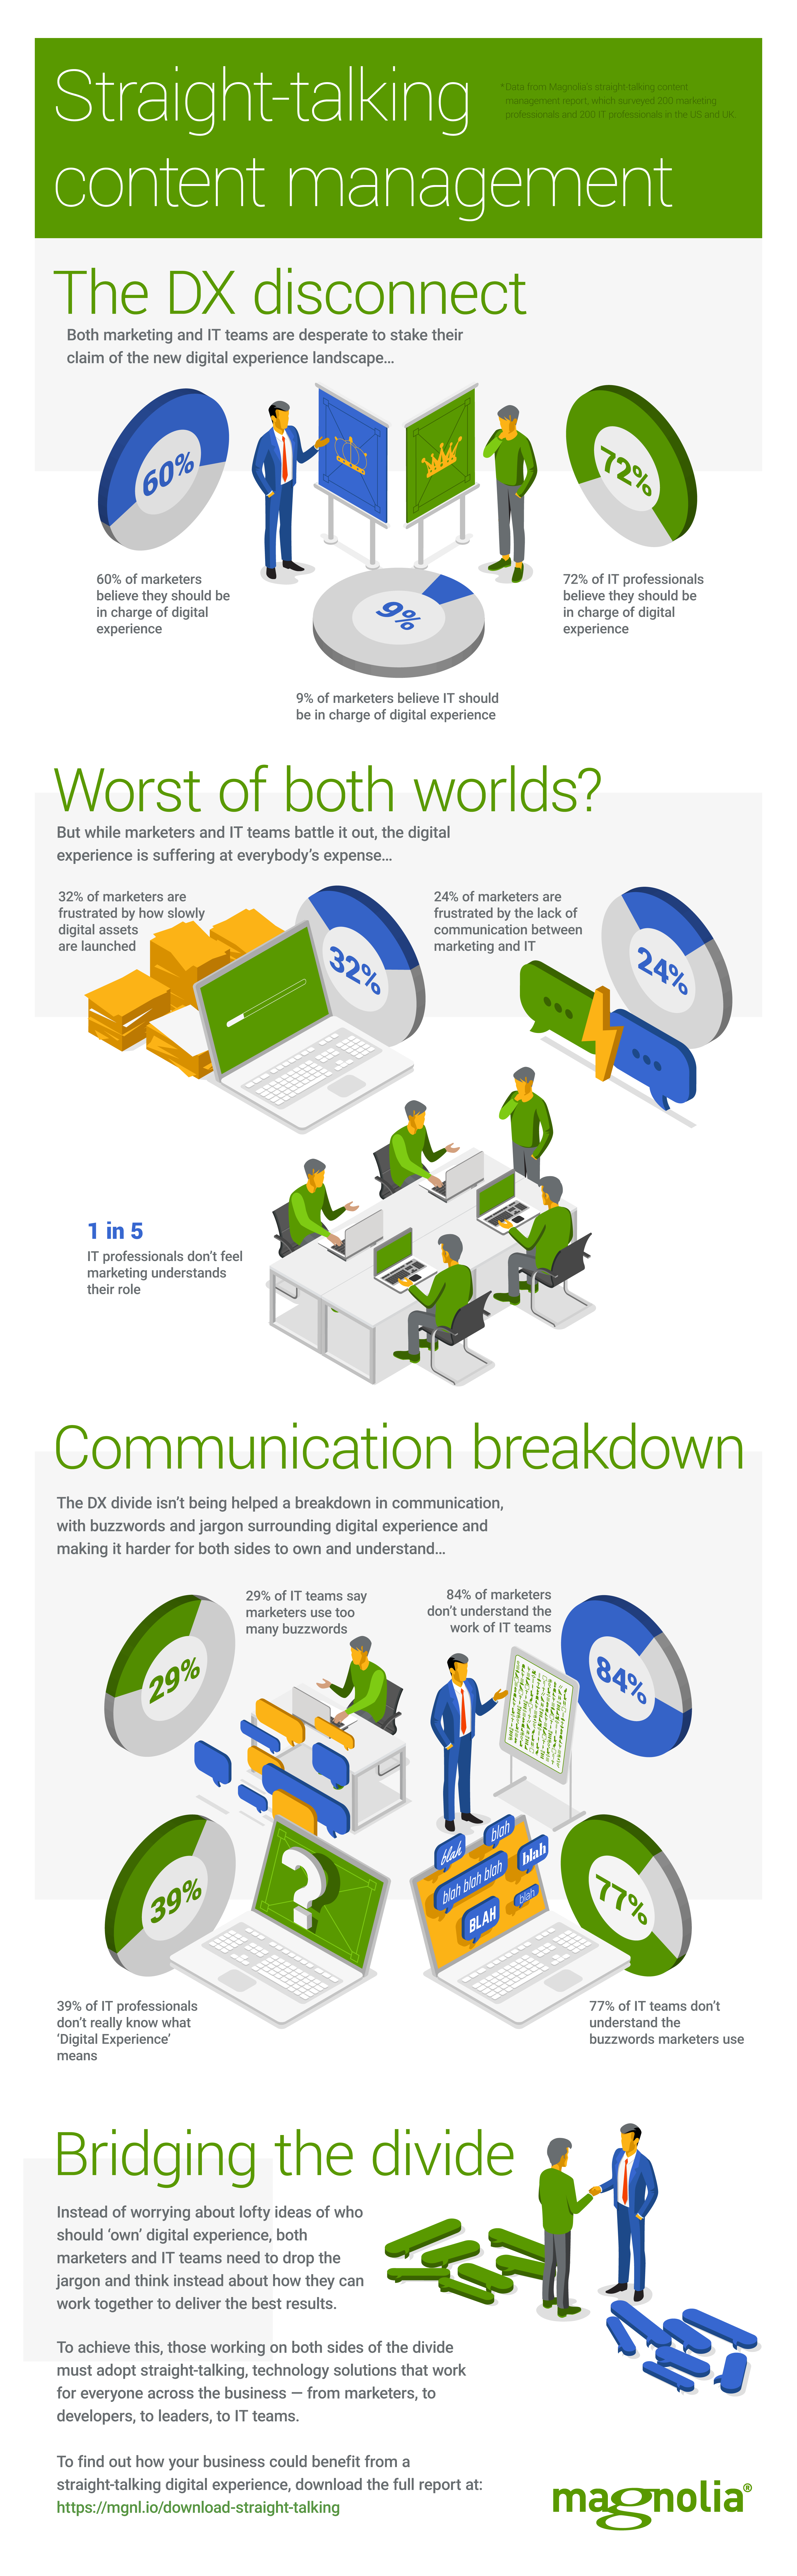 Straight-talking content management infographic final